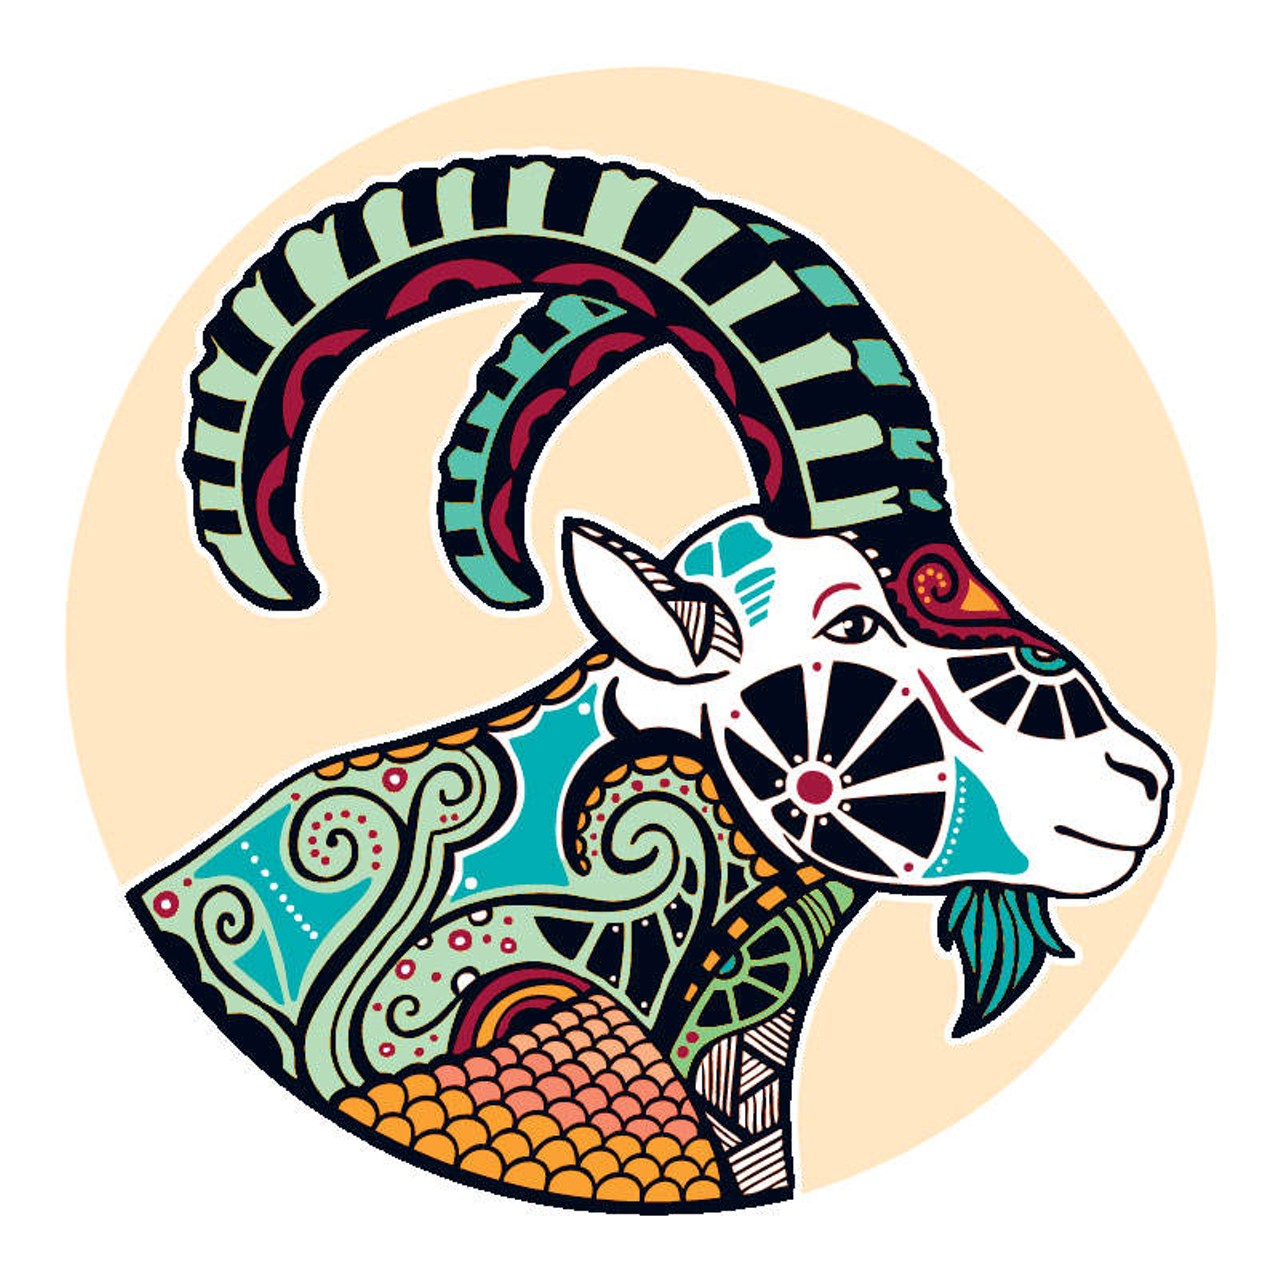 CAPRICORN (Dec. 21-Jan. 20): 
You go a little overboard when sometimes it&#146;s best to hold your horses and think twice about it. It is also extremely important for you to keep your own counsel and refrain from putting too much stock in what those who claim to know better have to say. Part of this experience has to do with learning to trust your own gifts, and your own intuition. The deeper part of you has come into your own. Your truer gifts are in arms reach. Those who care keep inviting you to join them. It&#146;s up to you to decide what you can handle. The signs are friendly, for whatever you decide to do.